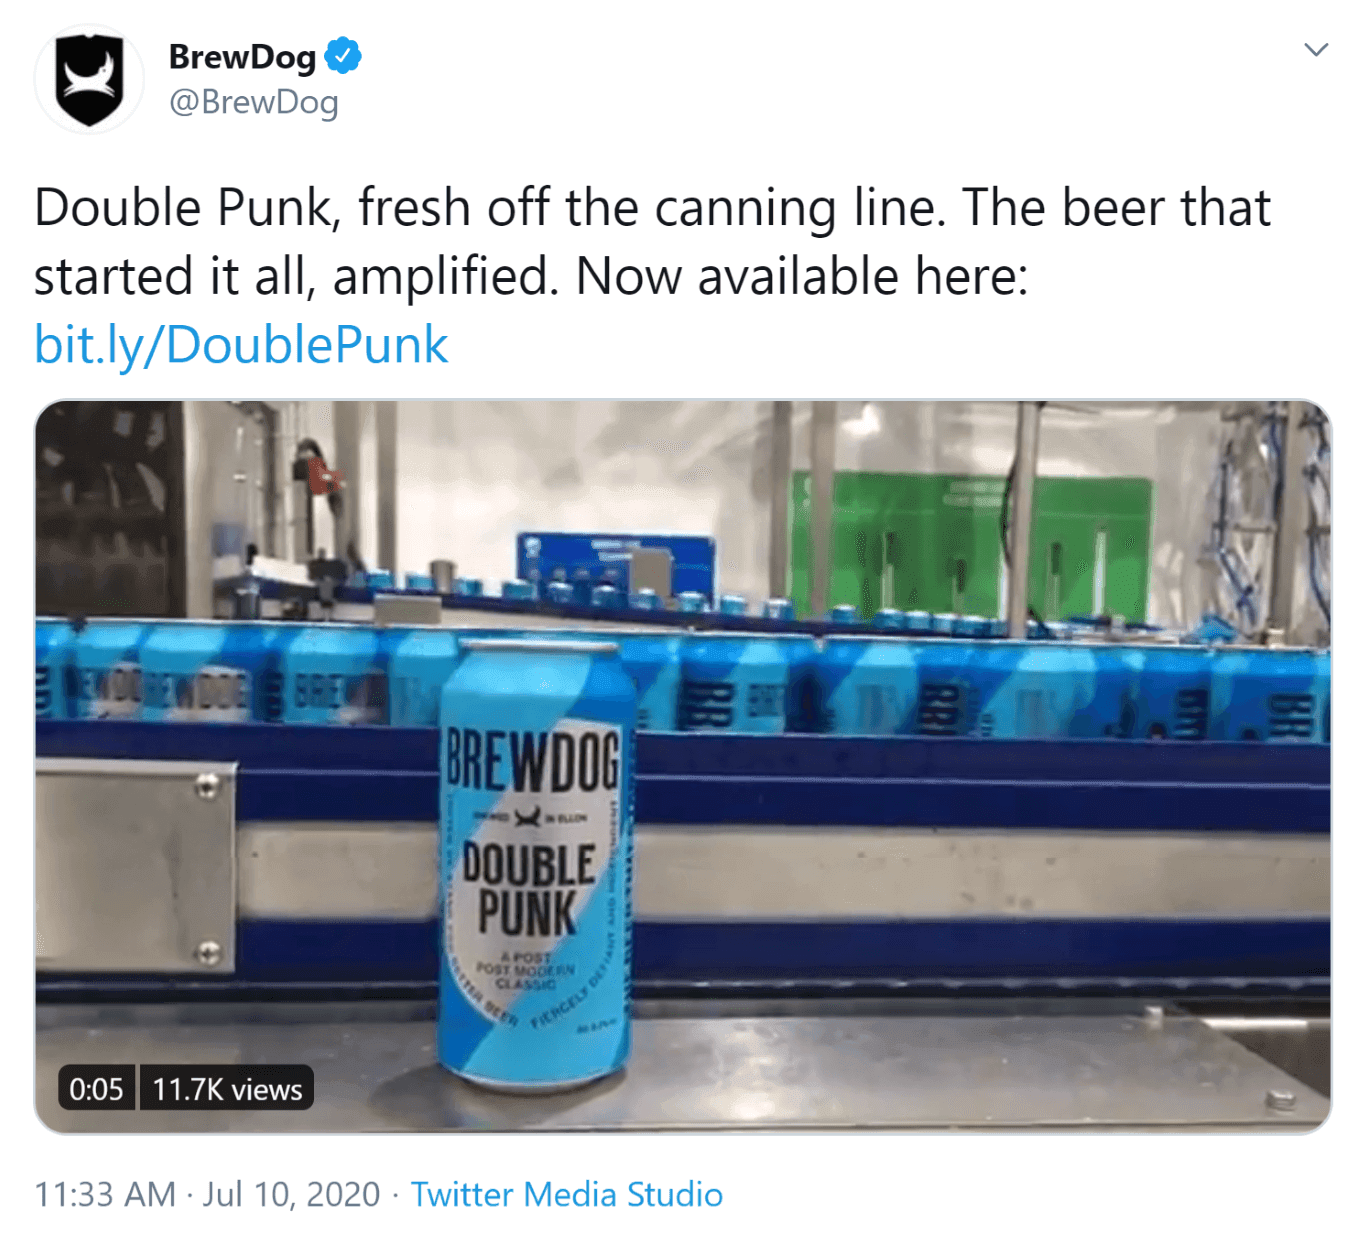 Example of a video ad Tweet from BrewDog